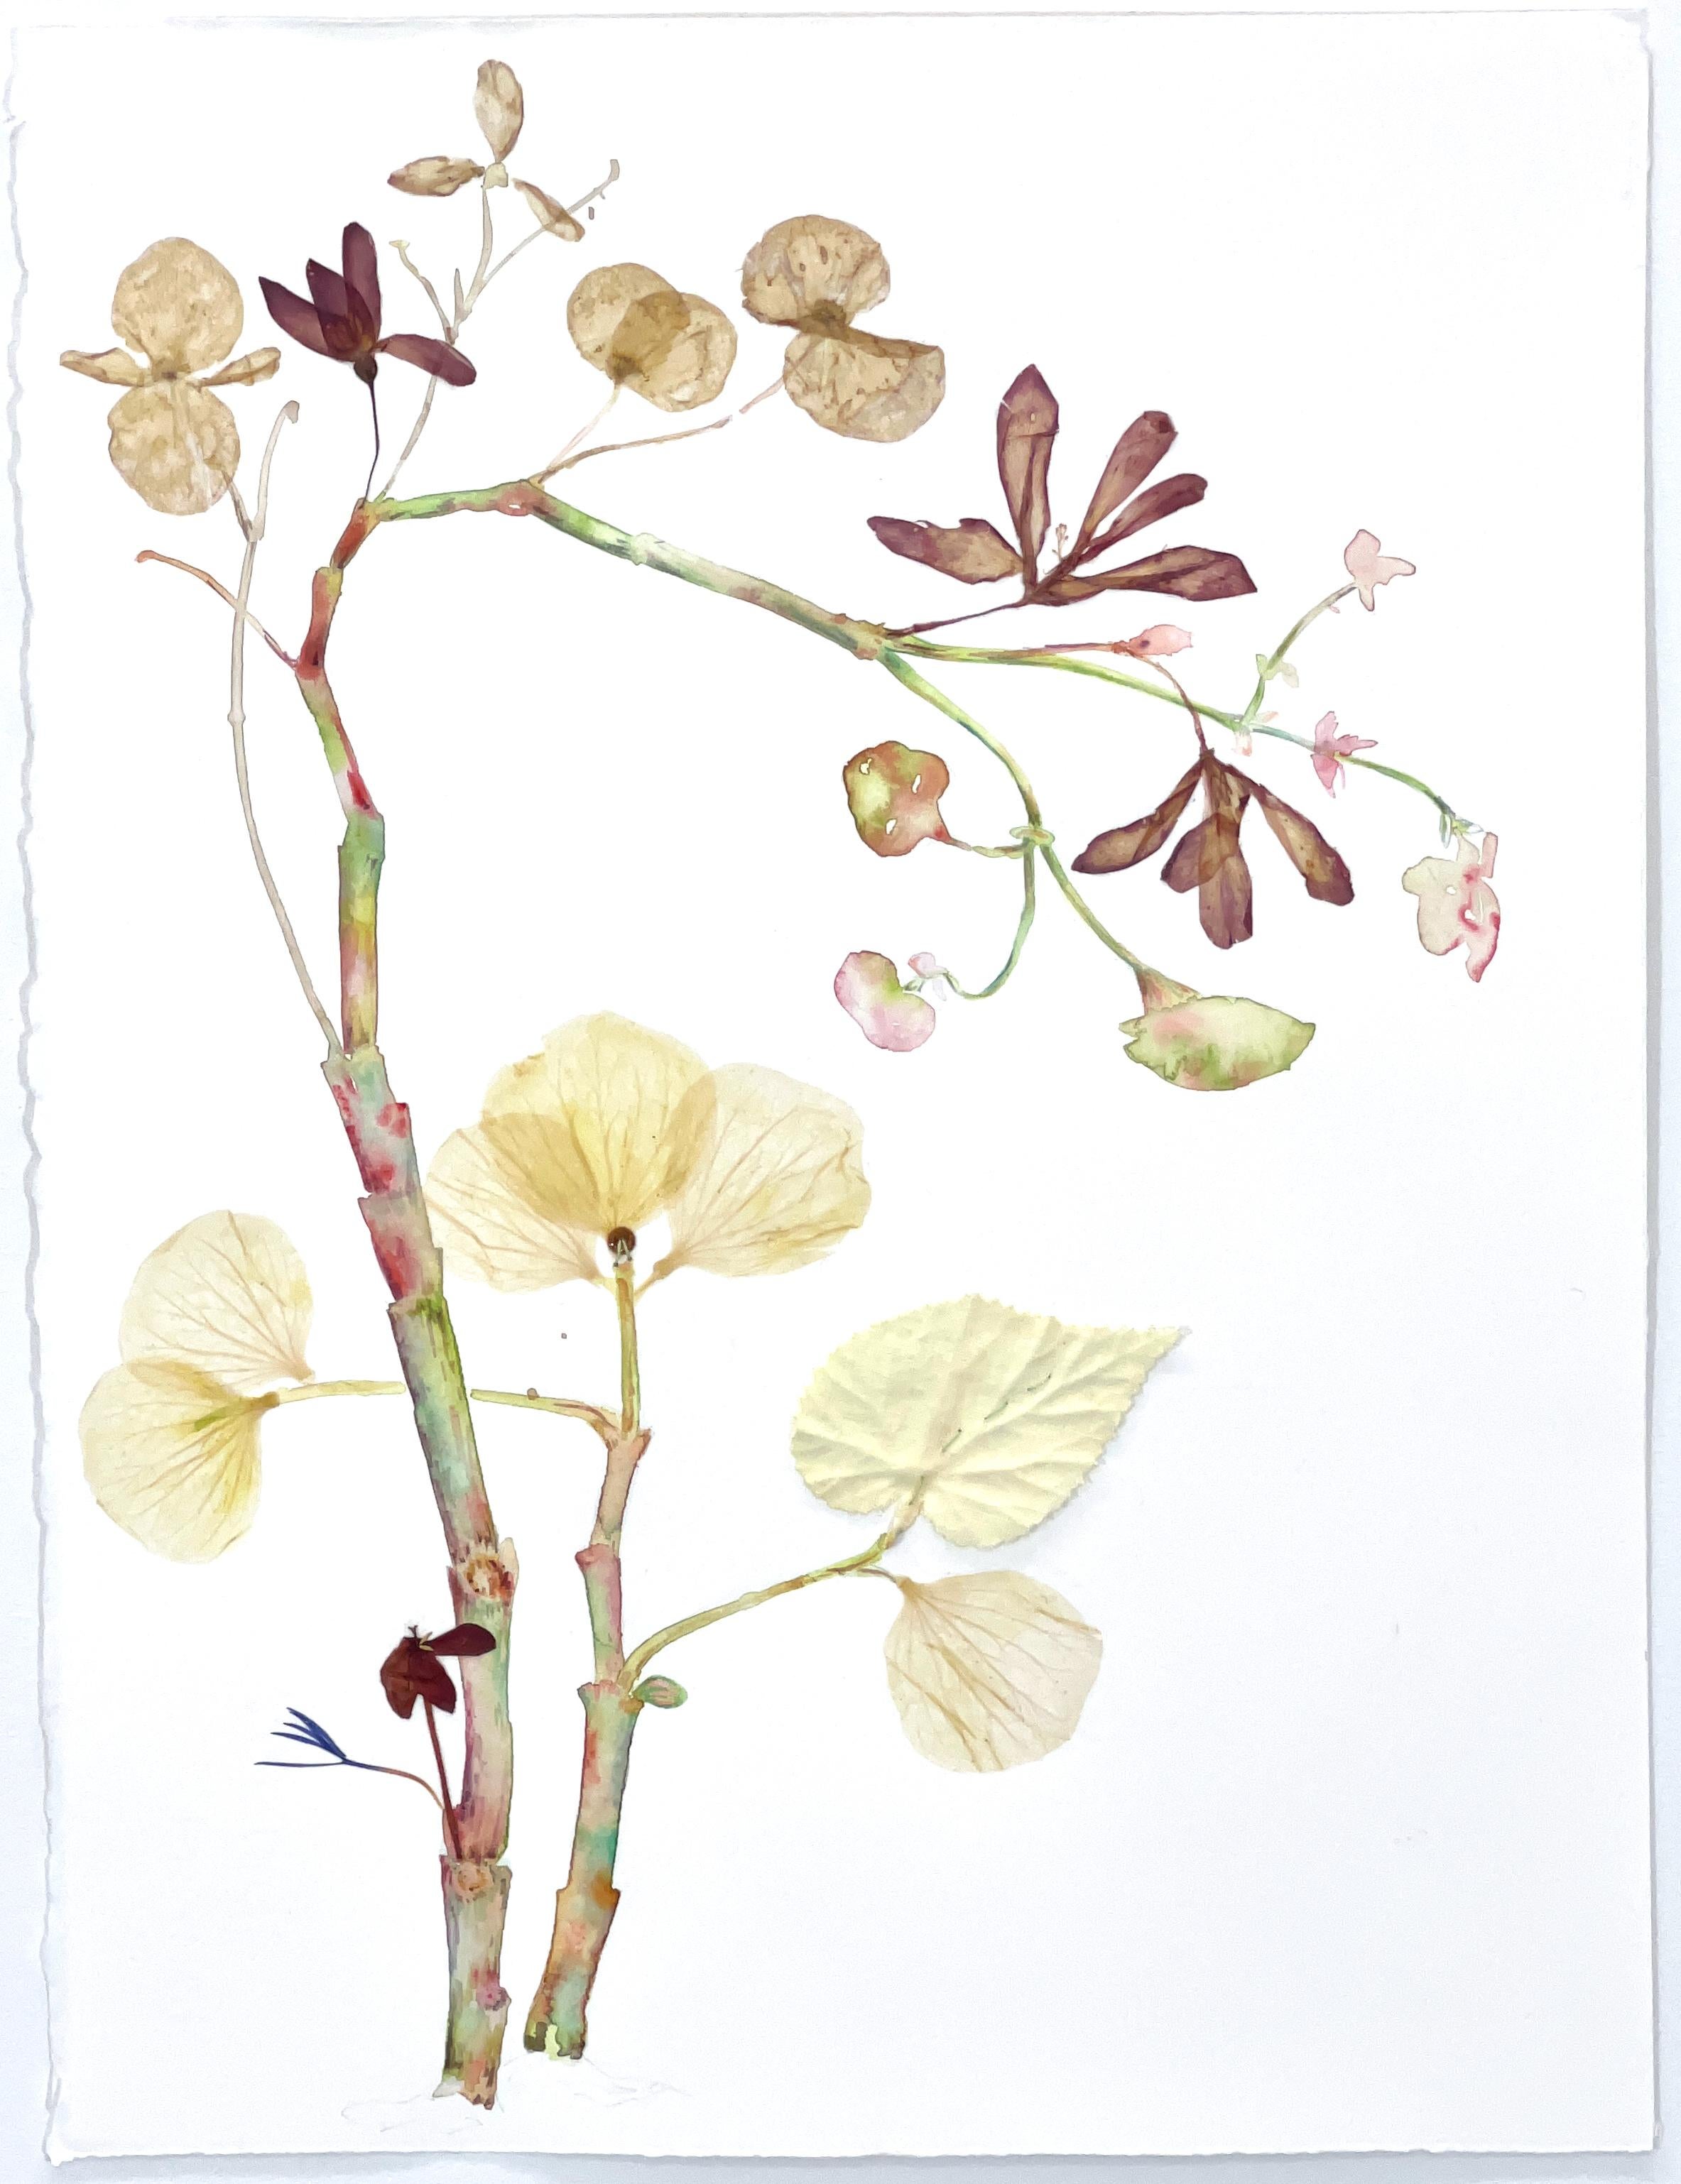 Marilla Palmer "Flowers Like Fans" - Watercolor and Pressed Flowers on Paper